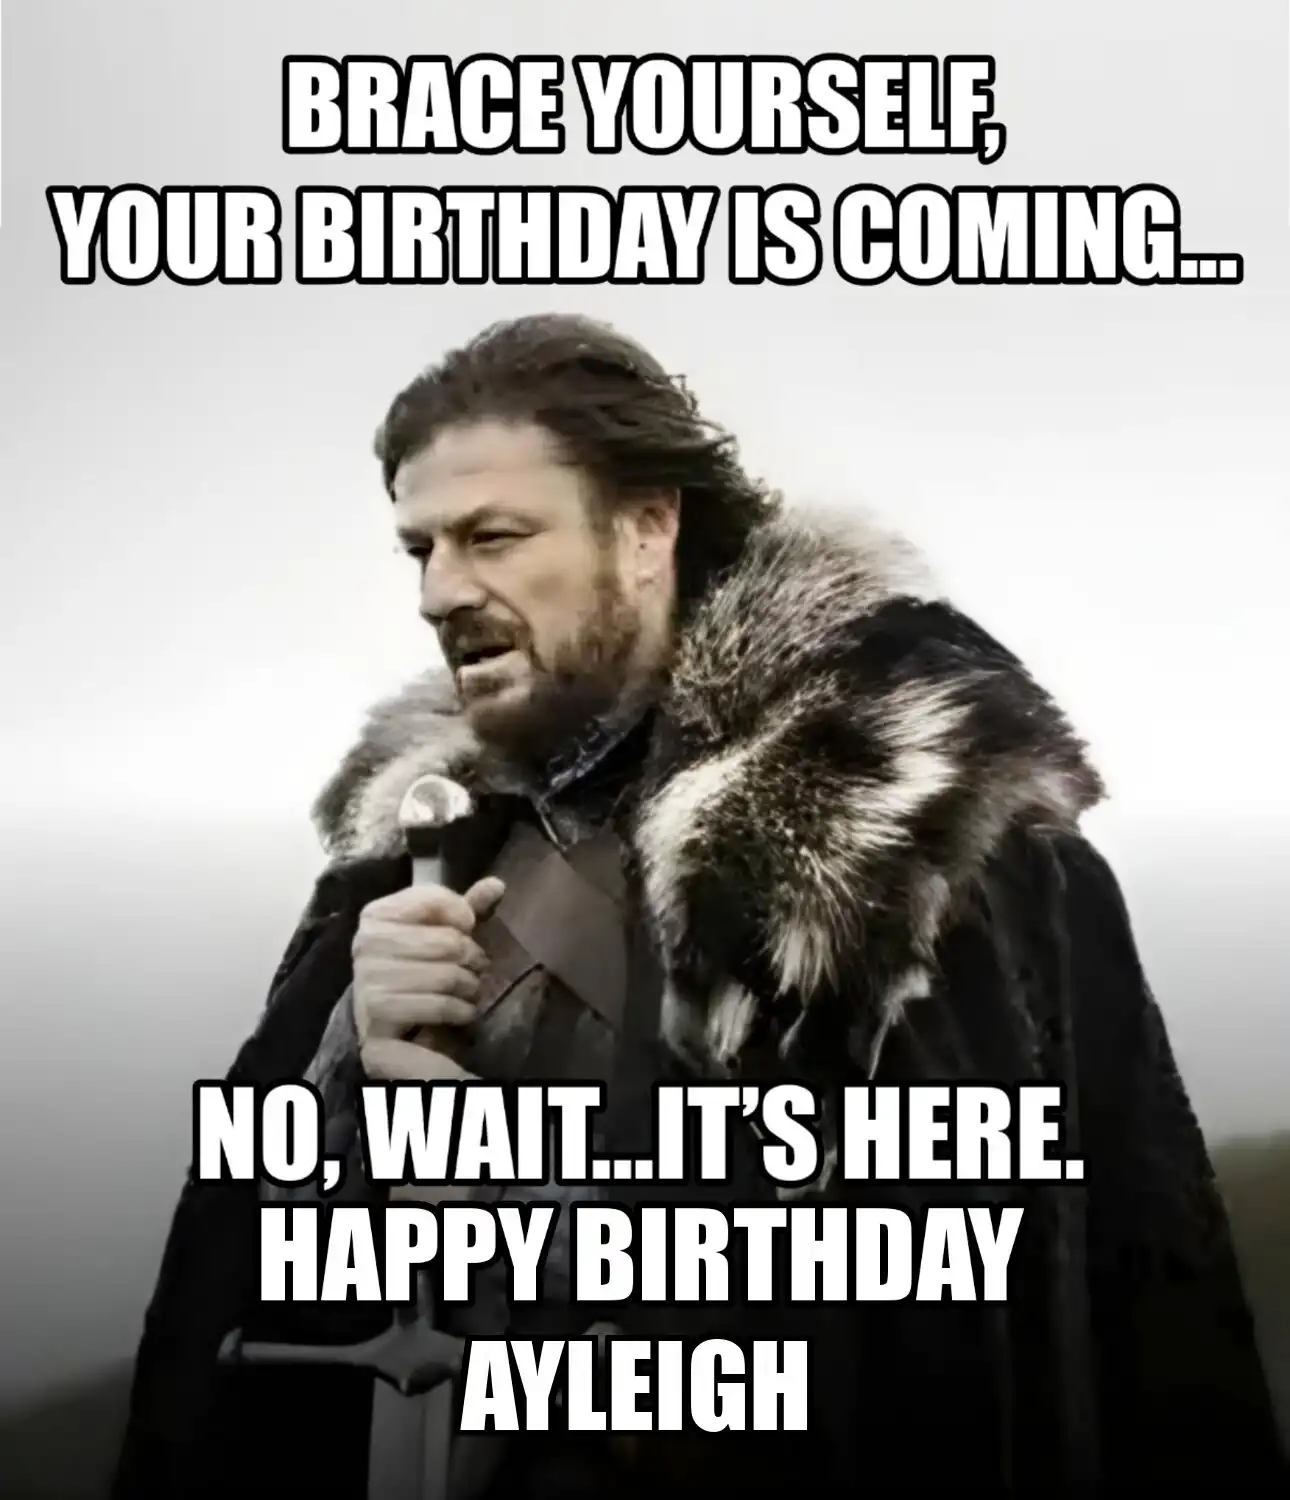 Happy Birthday Ayleigh Brace Yourself Your Birthday Is Coming Meme